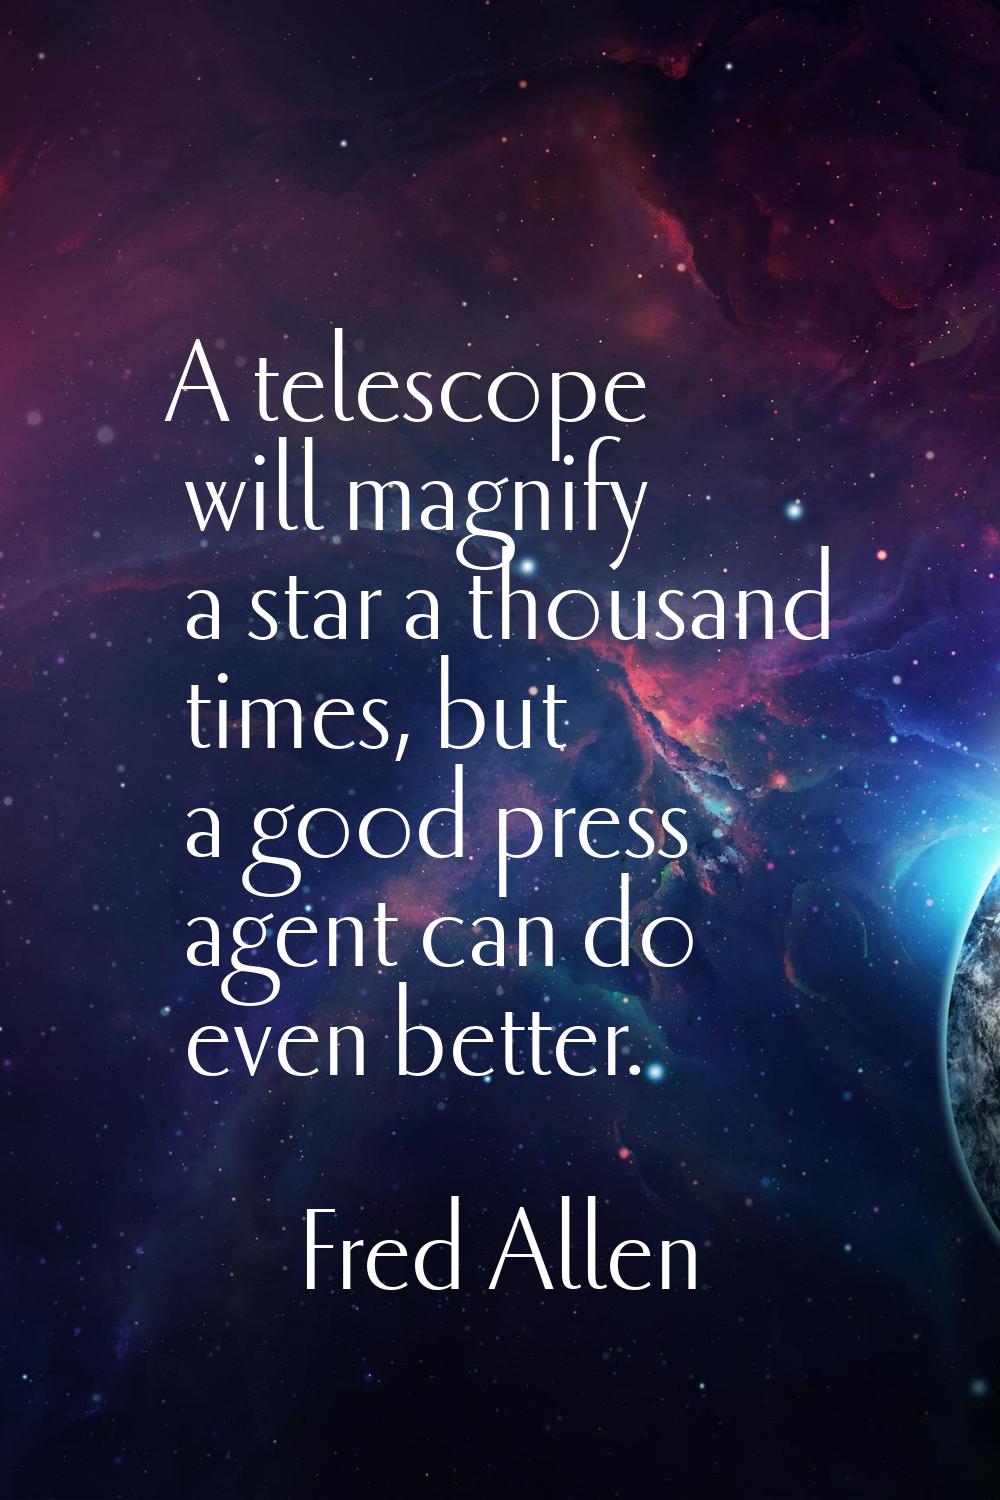 A telescope will magnify a star a thousand times, but a good press agent can do even better.